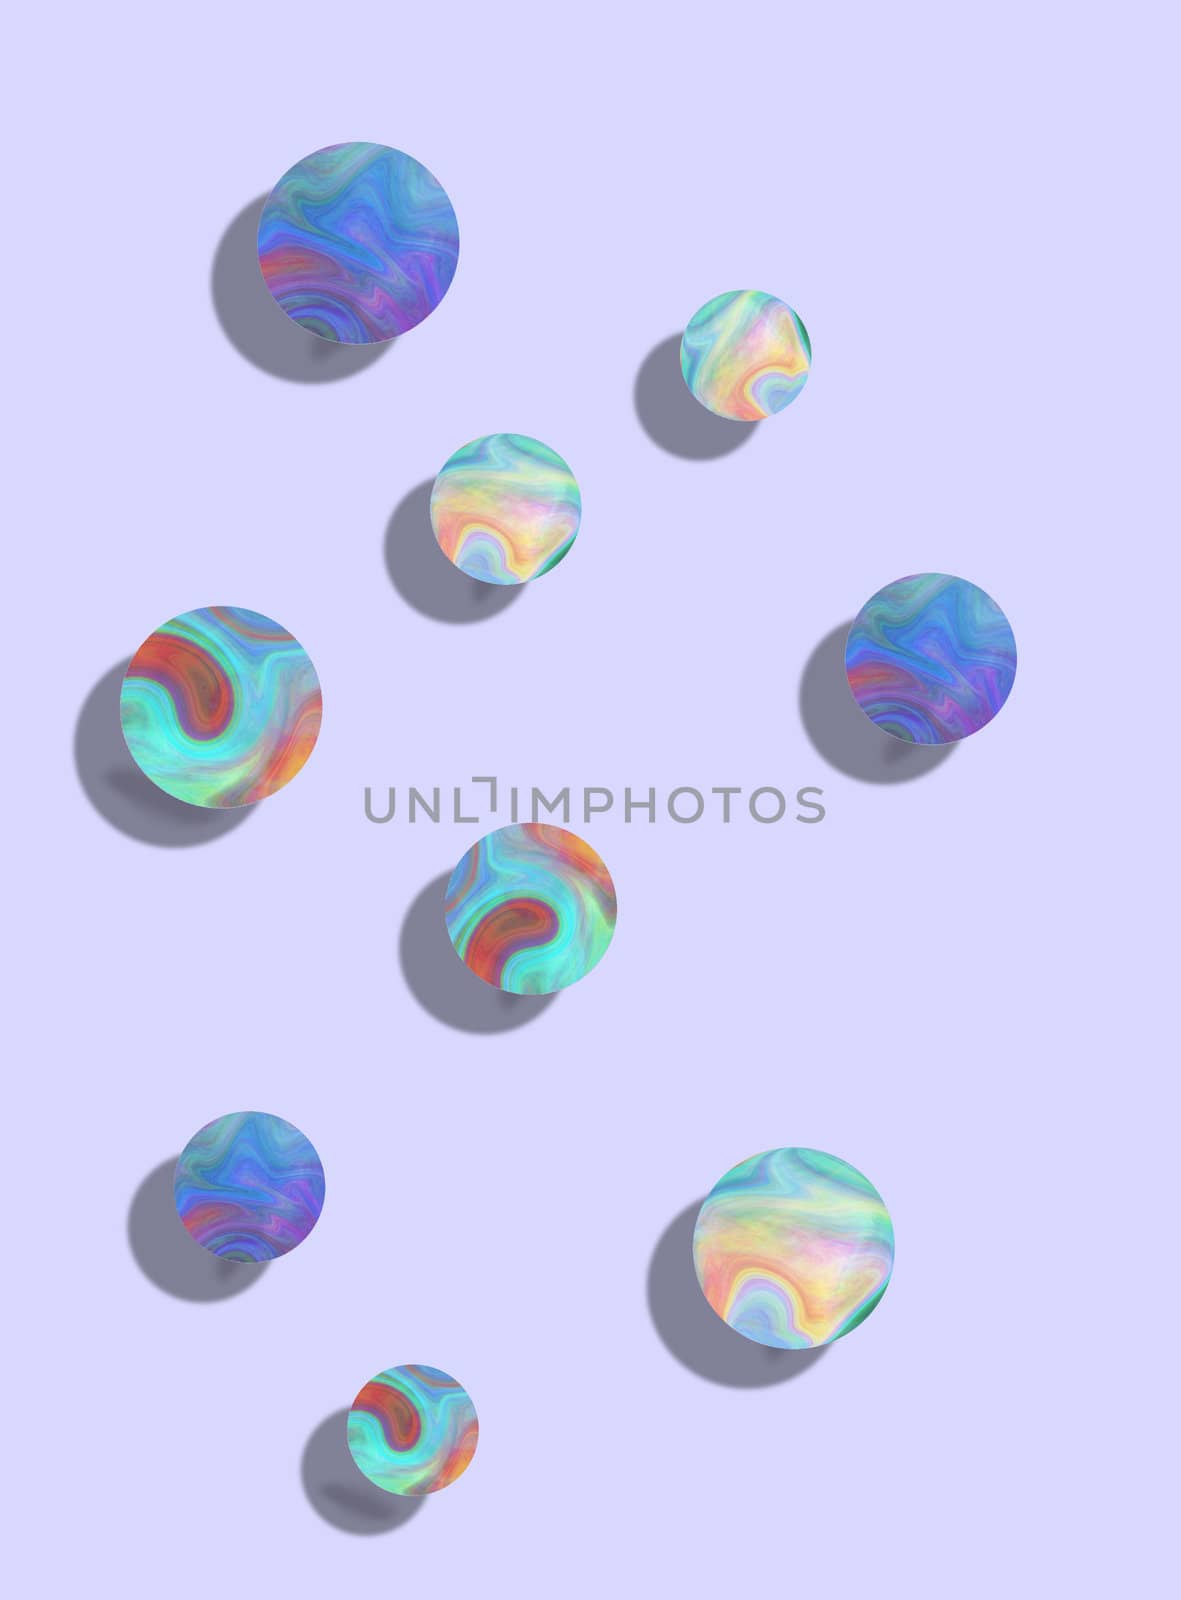 3D colorful bouncy balls on a powder blue background designed with a playful element in mind.